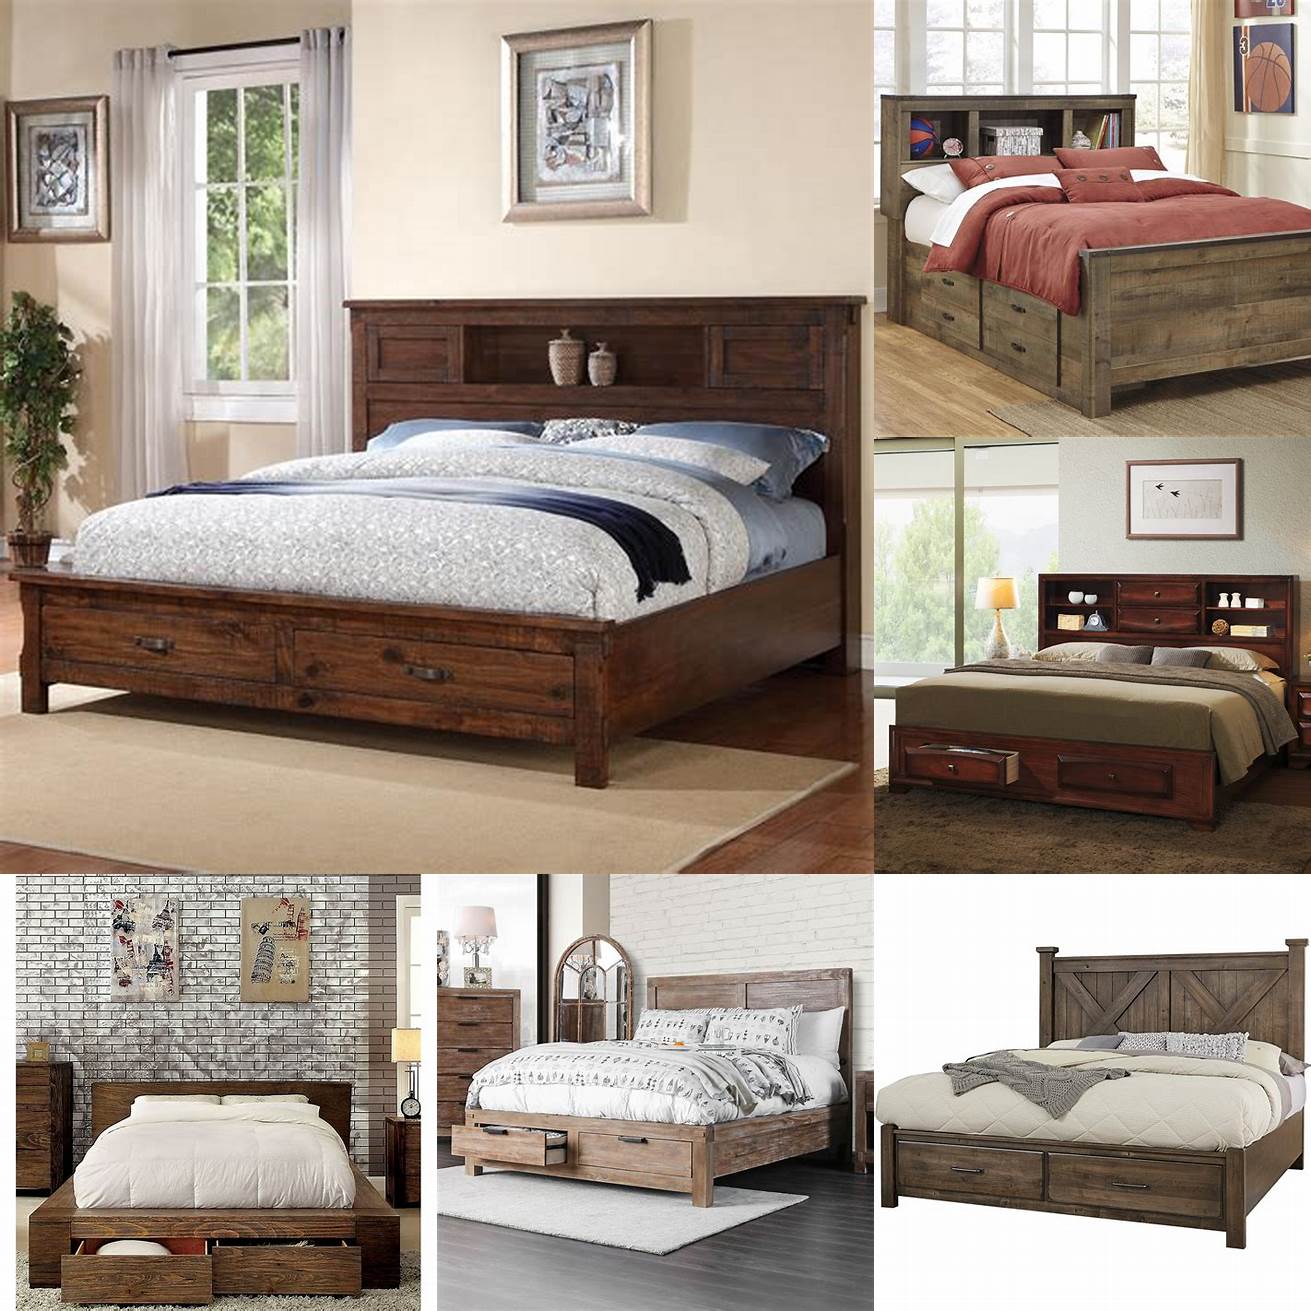 Image of a king size storage bed with a rustic finish